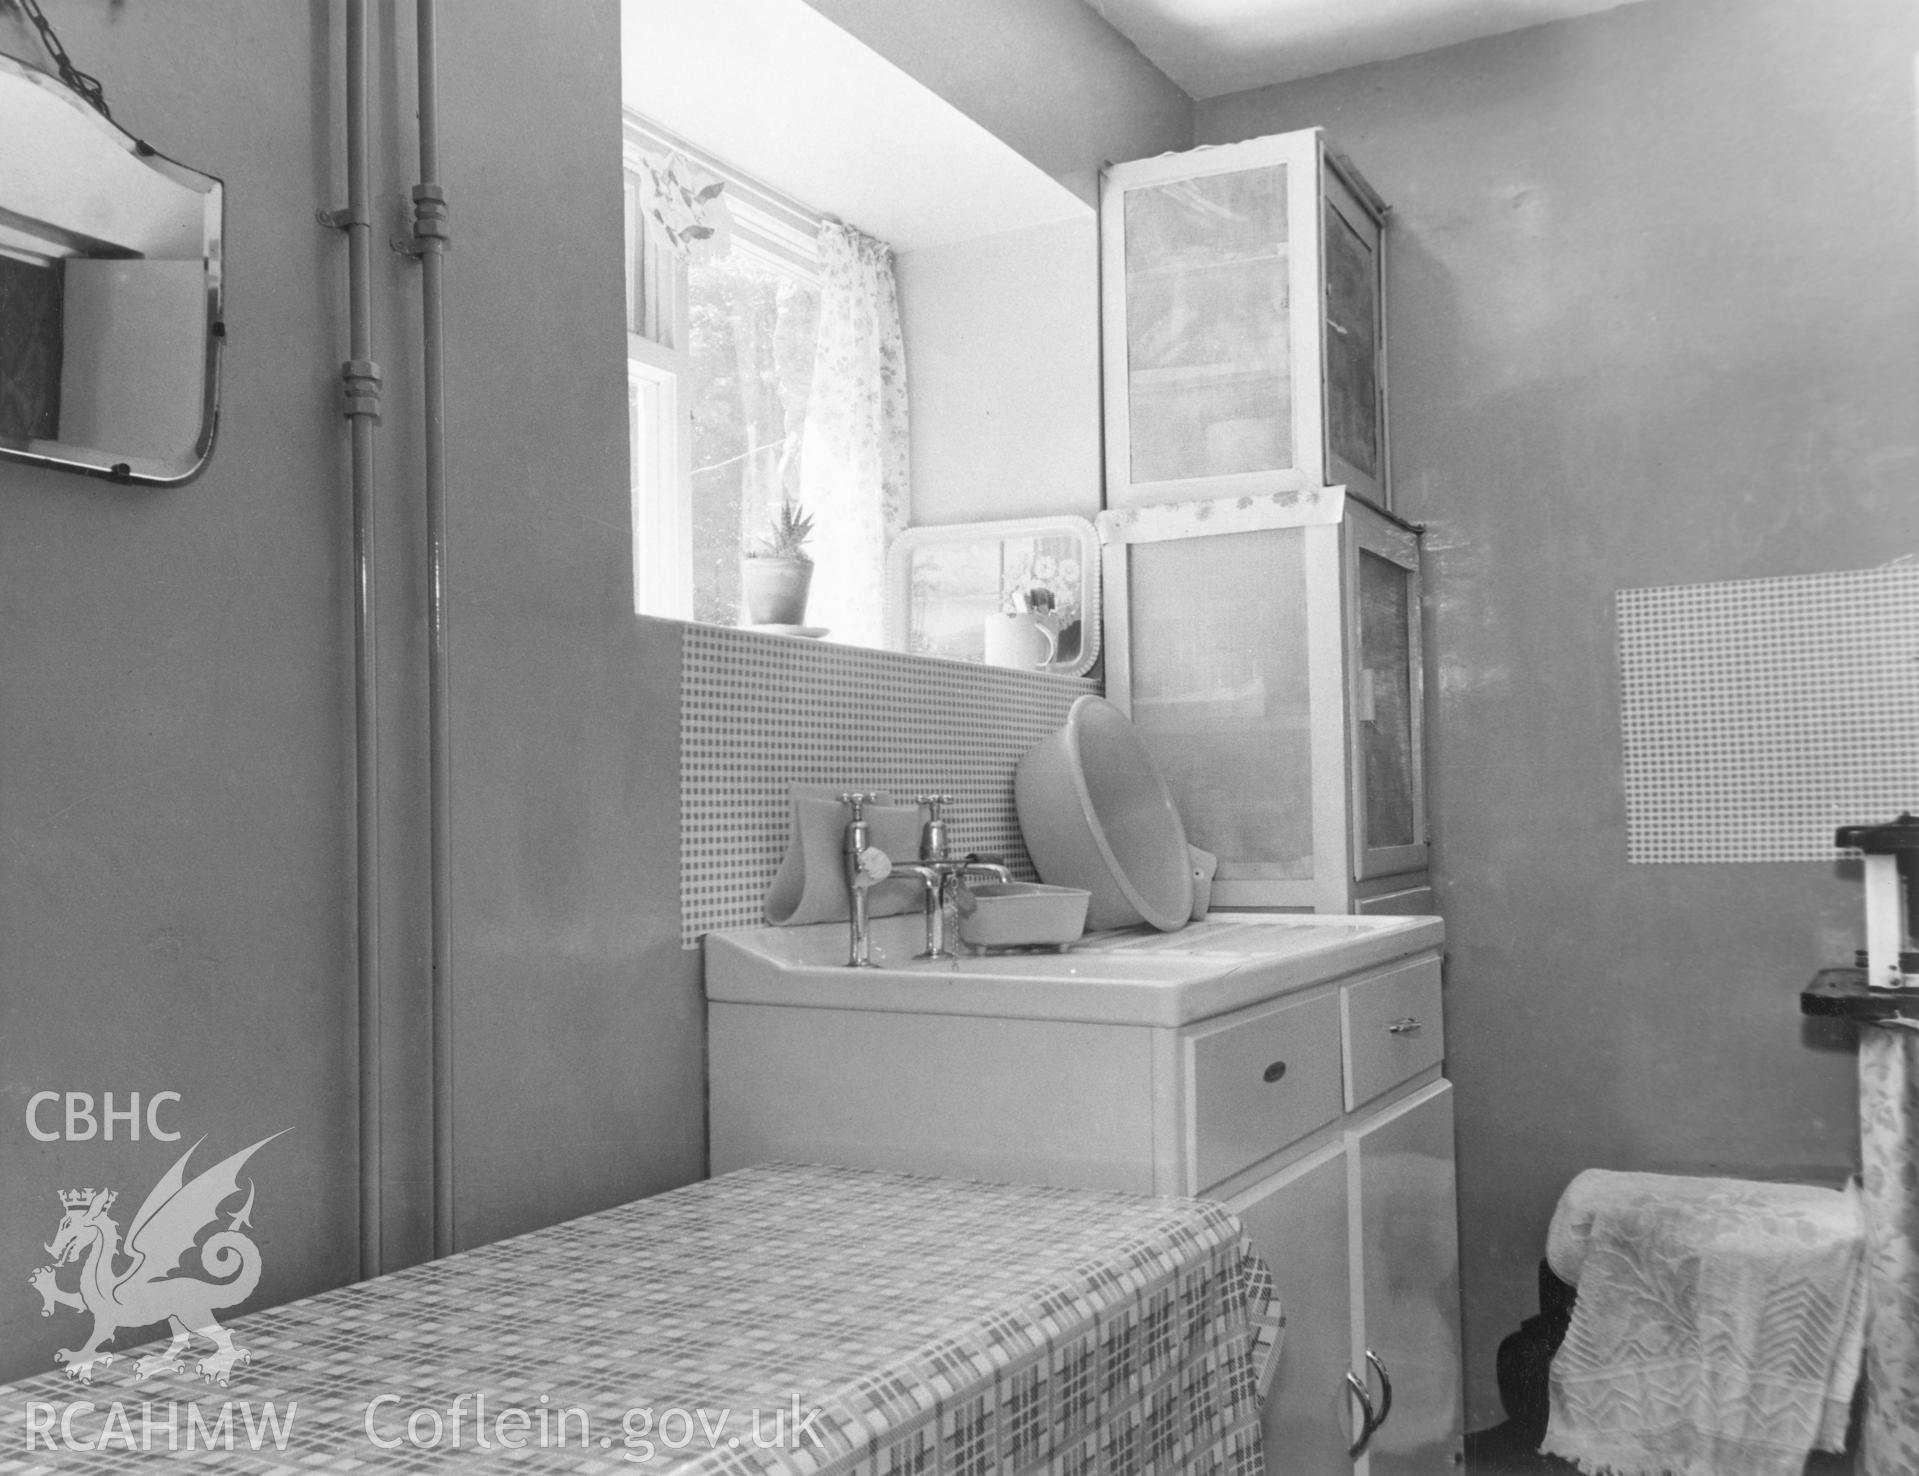 1 b/w print showing interior of house on High Street, Ysbyty Ifan (new sink unit), used as an illustration of the Housing Improvement Grant scheme for exhibitions held at Ministry of Housing stands at agricultural shows (1960); collated by the former Central Office of Information.